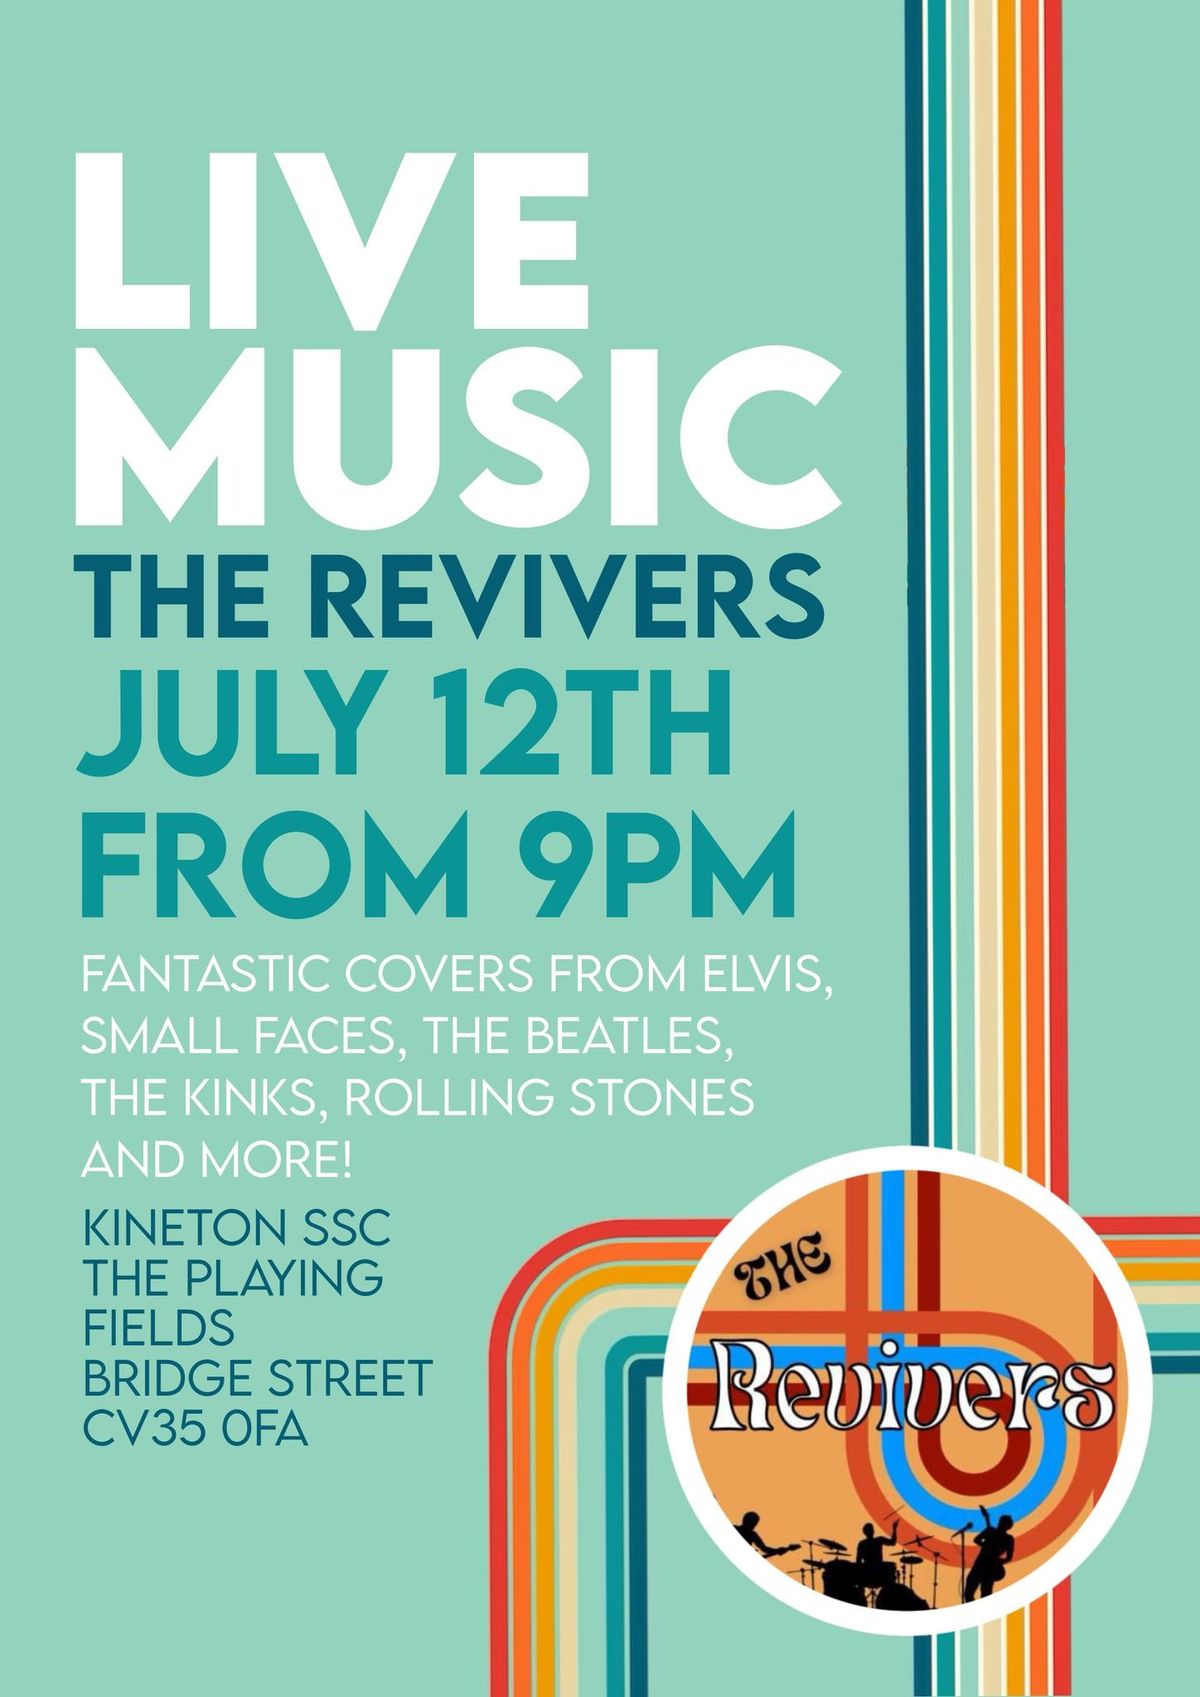 Live Music - The Revivers